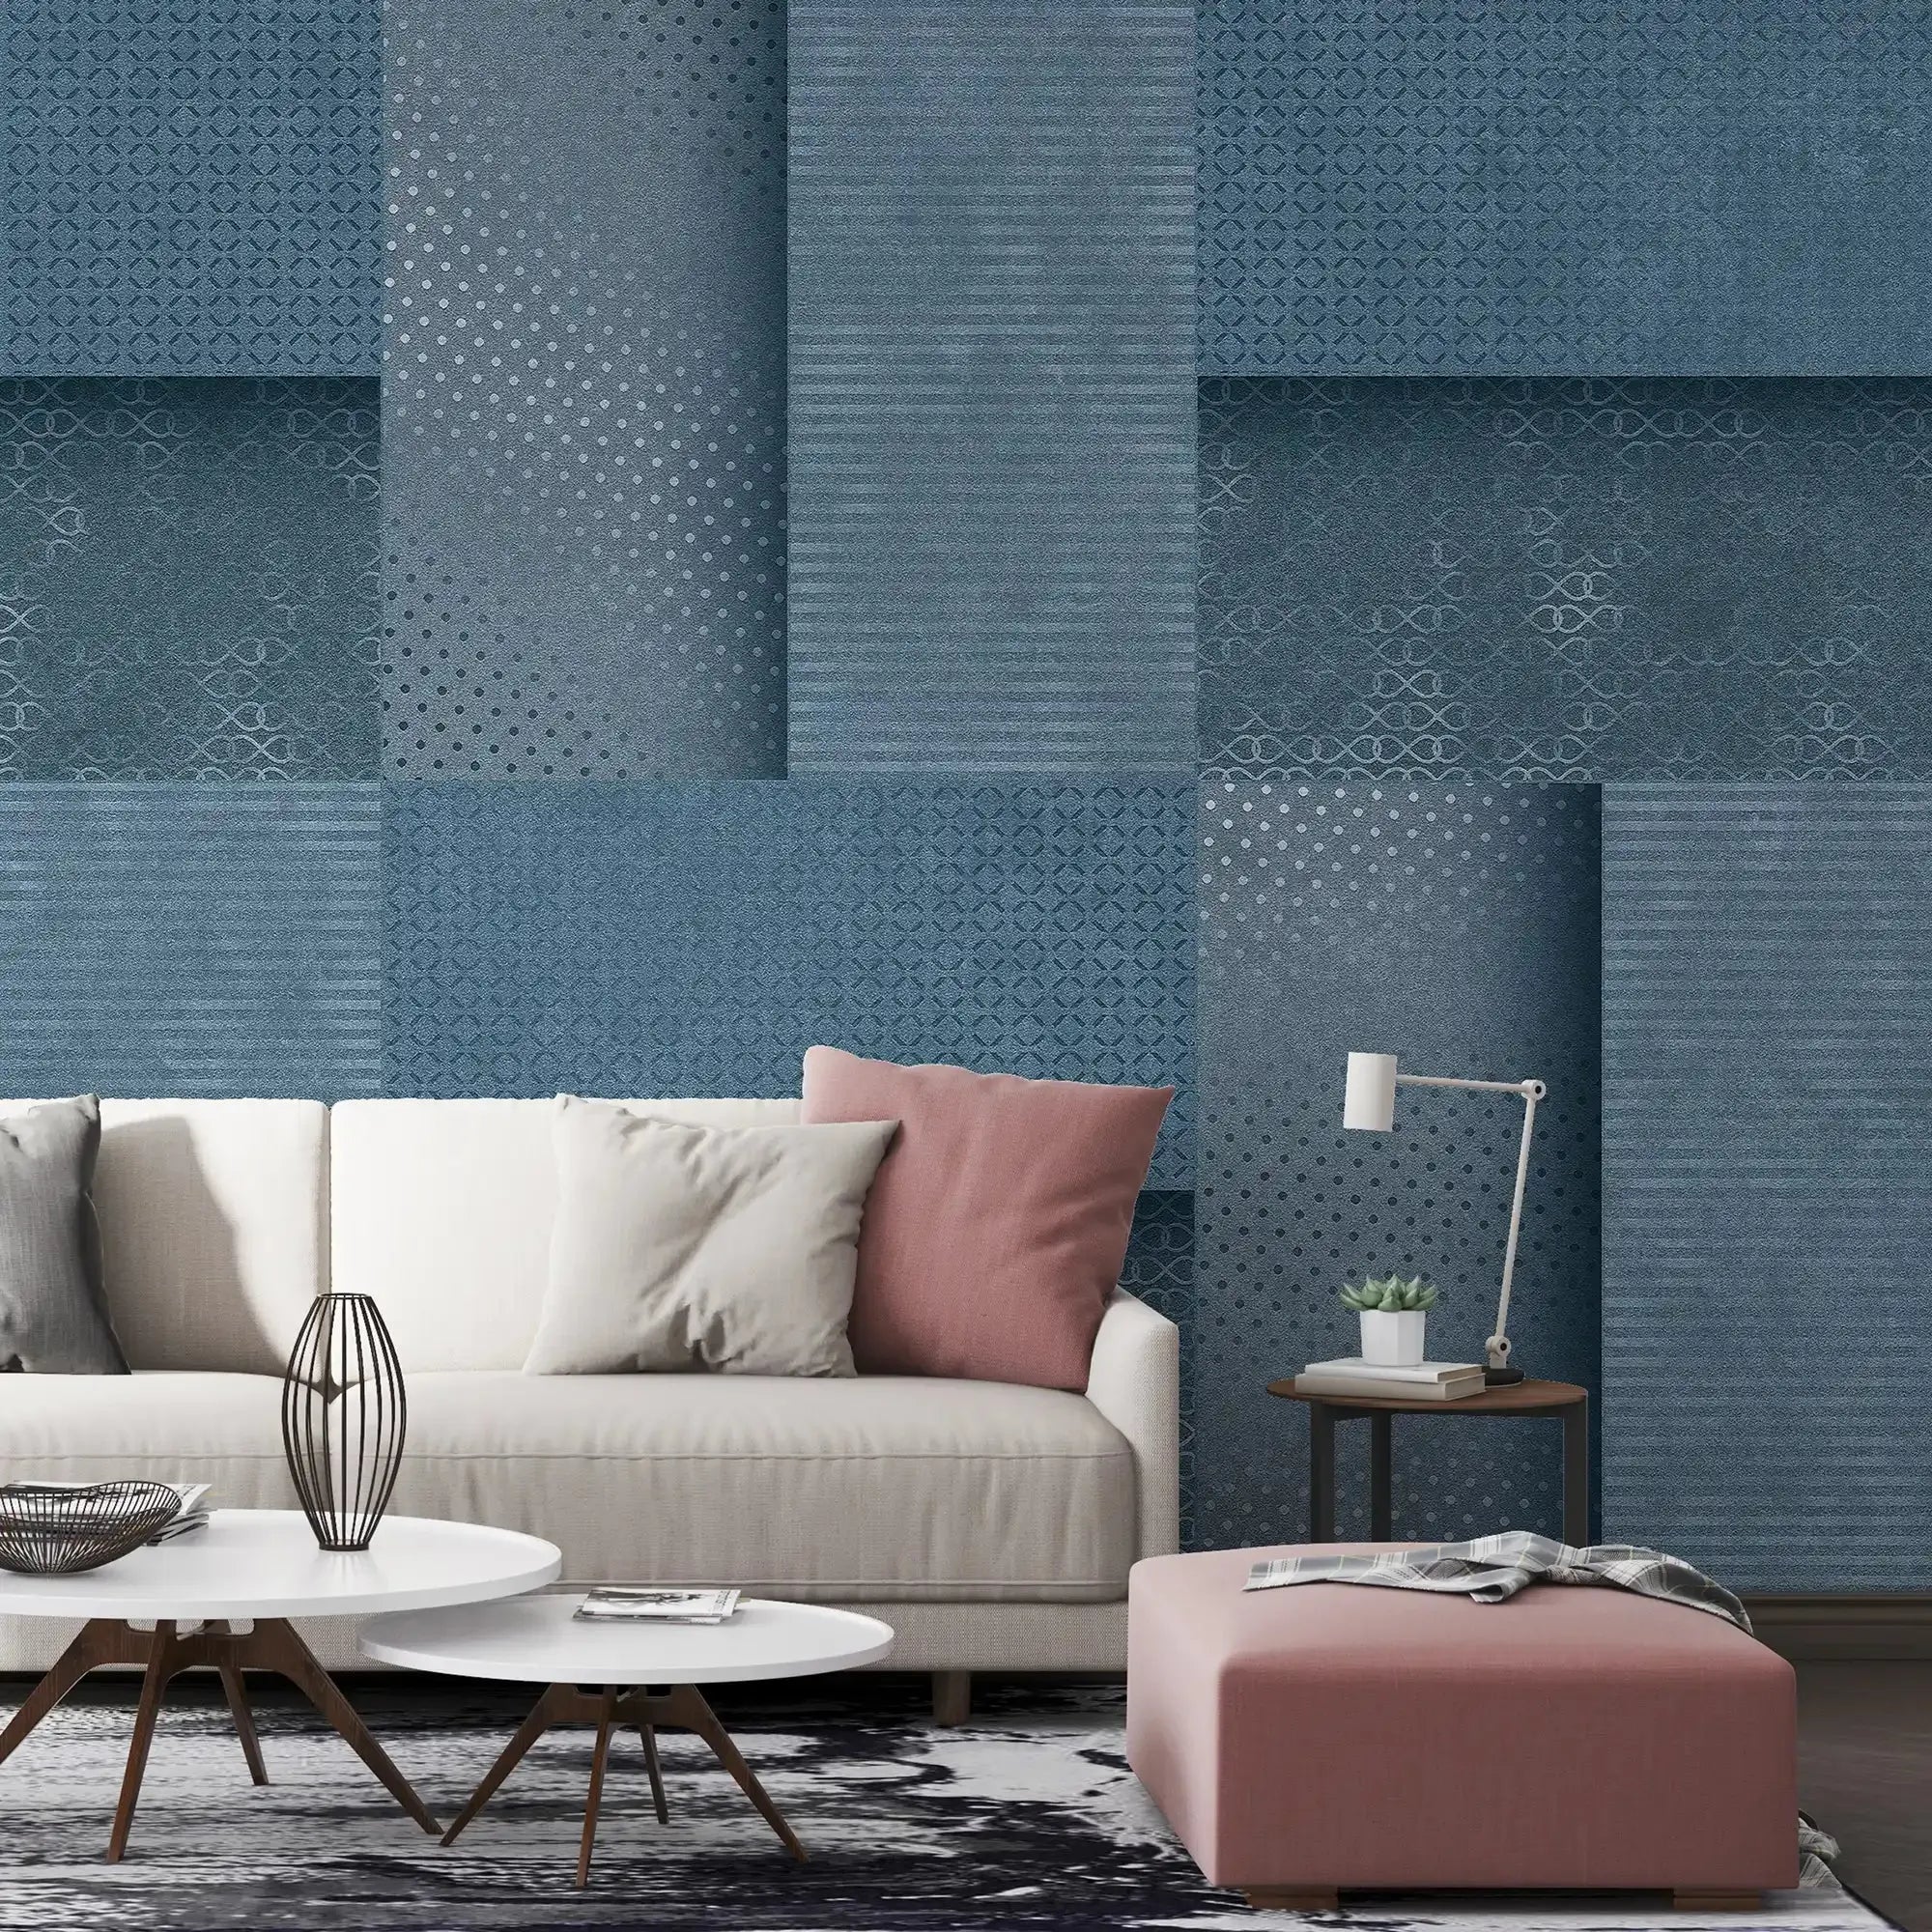 3082-A / Peel and Stick Wallpaper: Blue Tile Square Pattern, Easy Install, Adhesive Wall Decor for Bathroom, Kitchen, and Living Room - Artevella